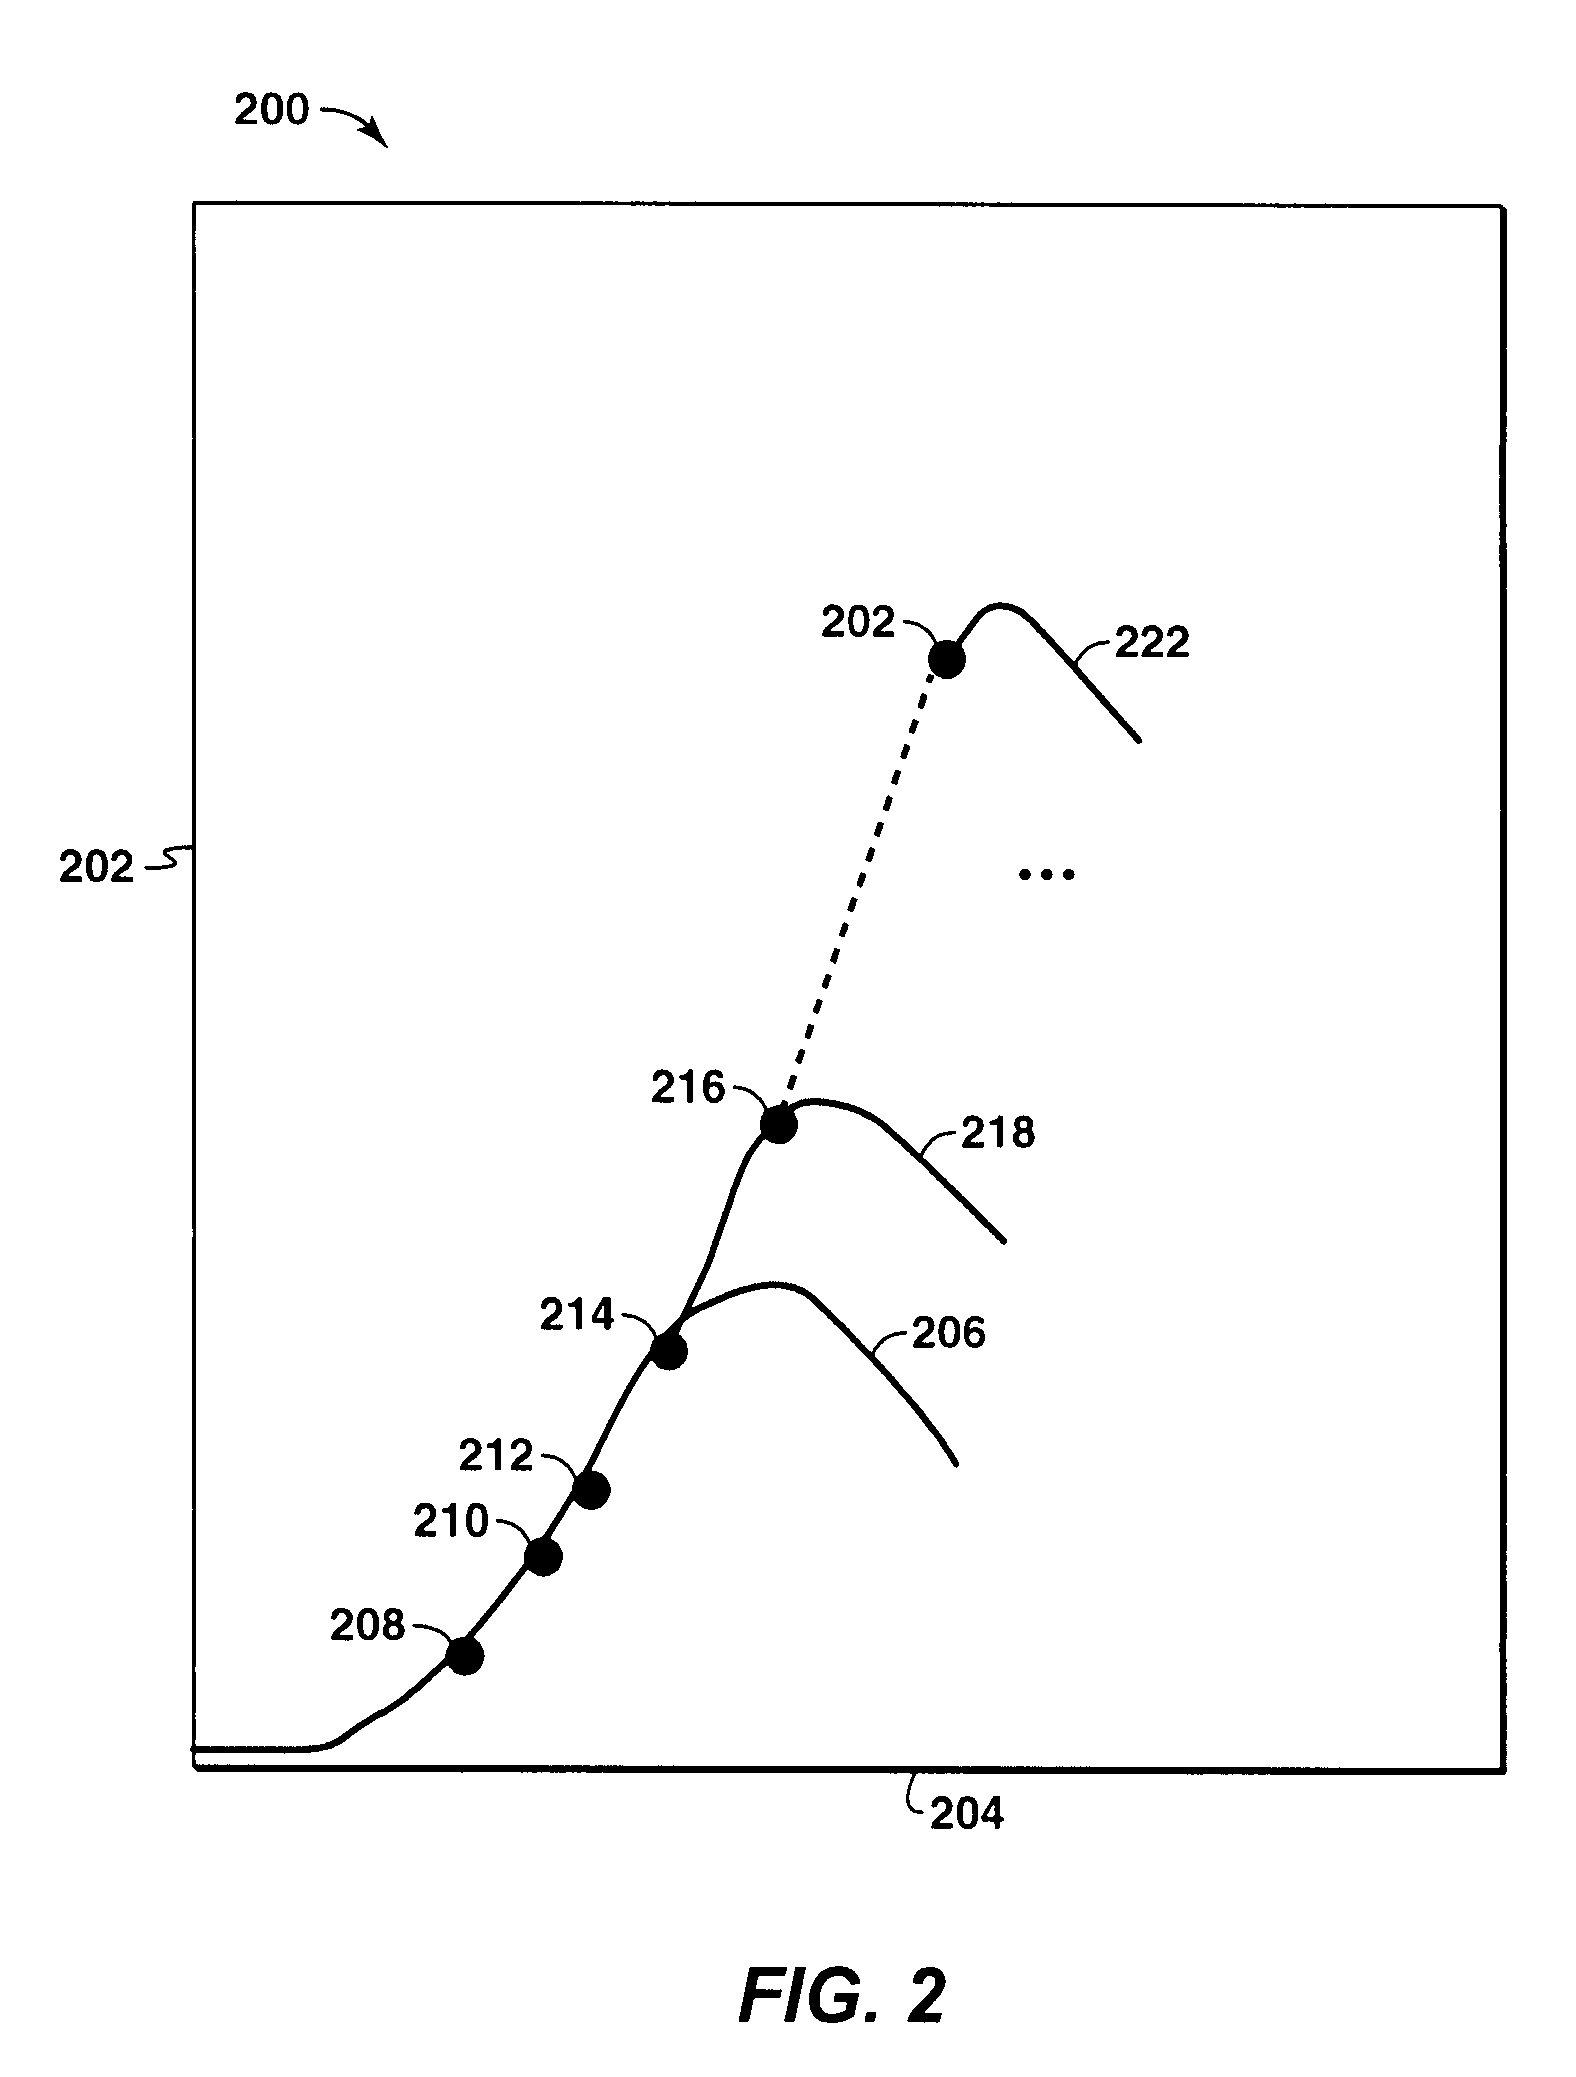 Method of drilling and producing hydrocarbons from subsurface formations